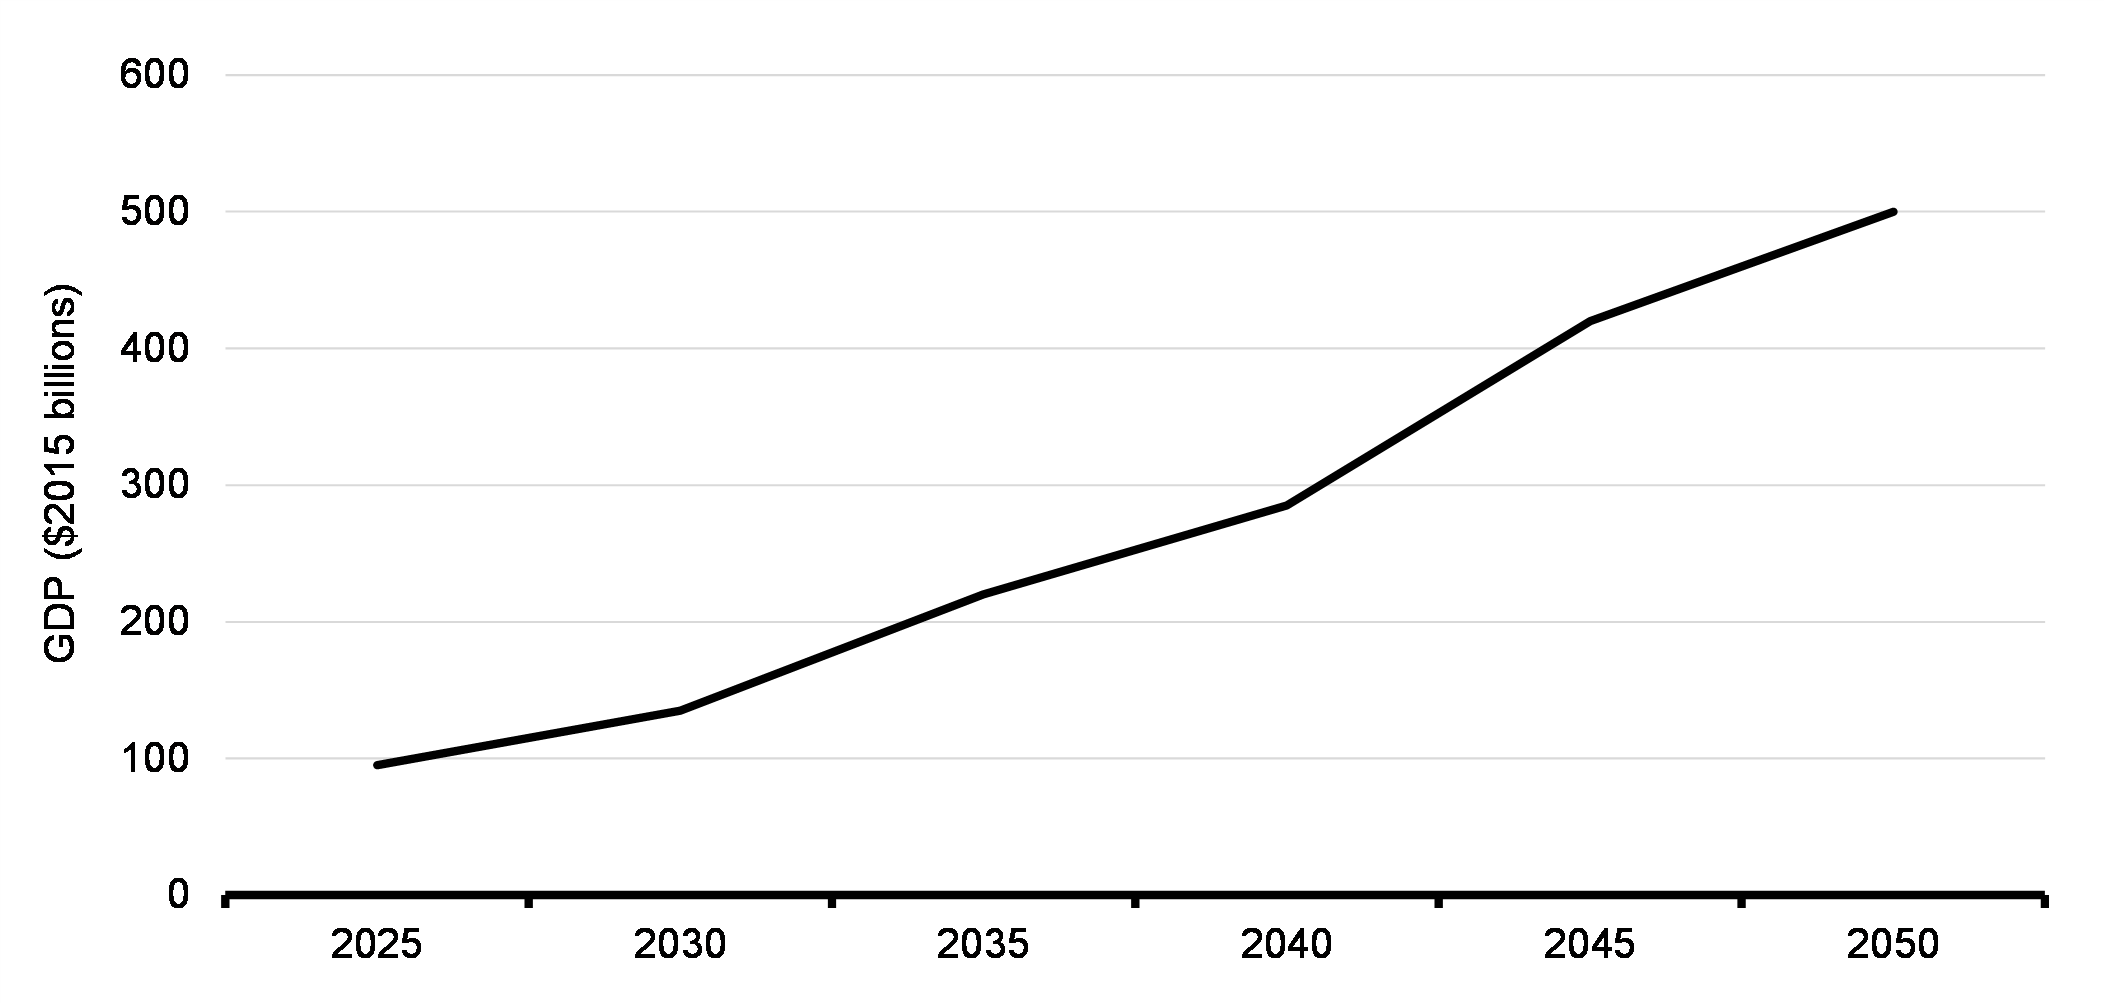 Chart 4.6: Clean Energy GDP Growth, 2025-2050